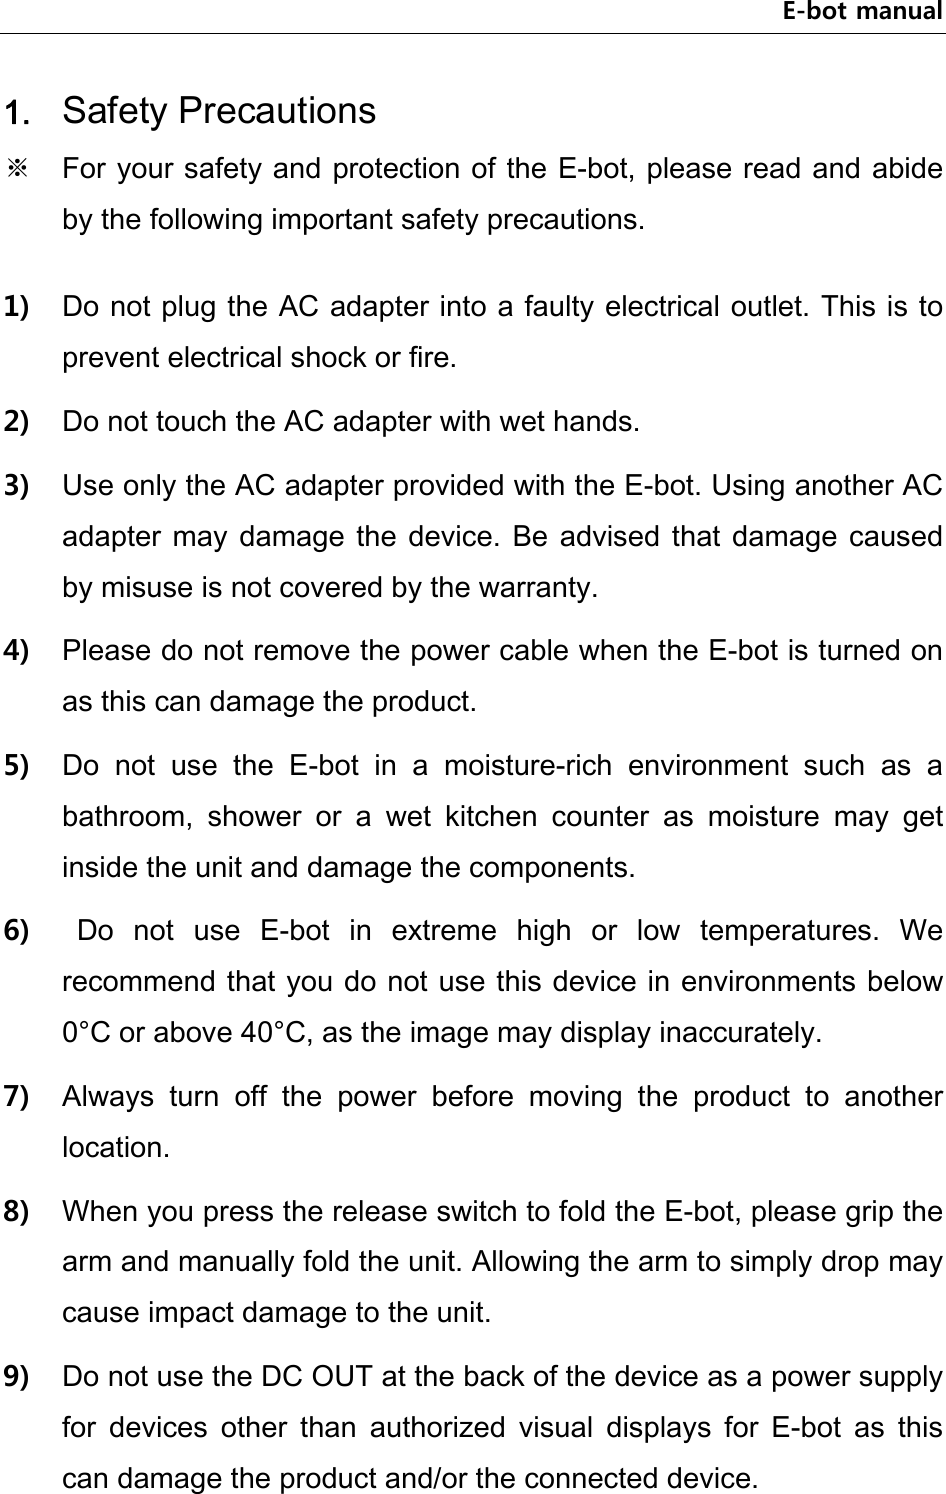 E-bot manual 1. Safety Precautions ※  For your safety and protection of the E-bot, please read and abide by the following important safety precautions.  1) Do not plug the AC adapter into a faulty electrical outlet. This is to prevent electrical shock or fire. 2) Do not touch the AC adapter with wet hands. 3) Use only the AC adapter provided with the E-bot. Using another AC adapter may damage  the  device.  Be  advised  that  damage  caused by misuse is not covered by the warranty. 4) Please do not remove the power cable when the E-bot is turned on as this can damage the product.   5) Do  not  use  the  E-bot  in  a  moisture-rich  environment  such  as  a bathroom,  shower  or  a  wet  kitchen  counter  as  moisture  may  get inside the unit and damage the components.   6)   Do  not  use  E-bot  in  extreme  high  or  low  temperatures.  We recommend that you do not use this device in environments below 0°C or above 40°C, as the image may display inaccurately. 7) Always  turn  off  the  power  before  moving  the  product  to  another location. 8) When you press the release switch to fold the E-bot, please grip the arm and manually fold the unit. Allowing the arm to simply drop may cause impact damage to the unit. 9) Do not use the DC OUT at the back of the device as a power supply for  devices  other  than  authorized  visual  displays  for  E-bot  as  this can damage the product and/or the connected device. 